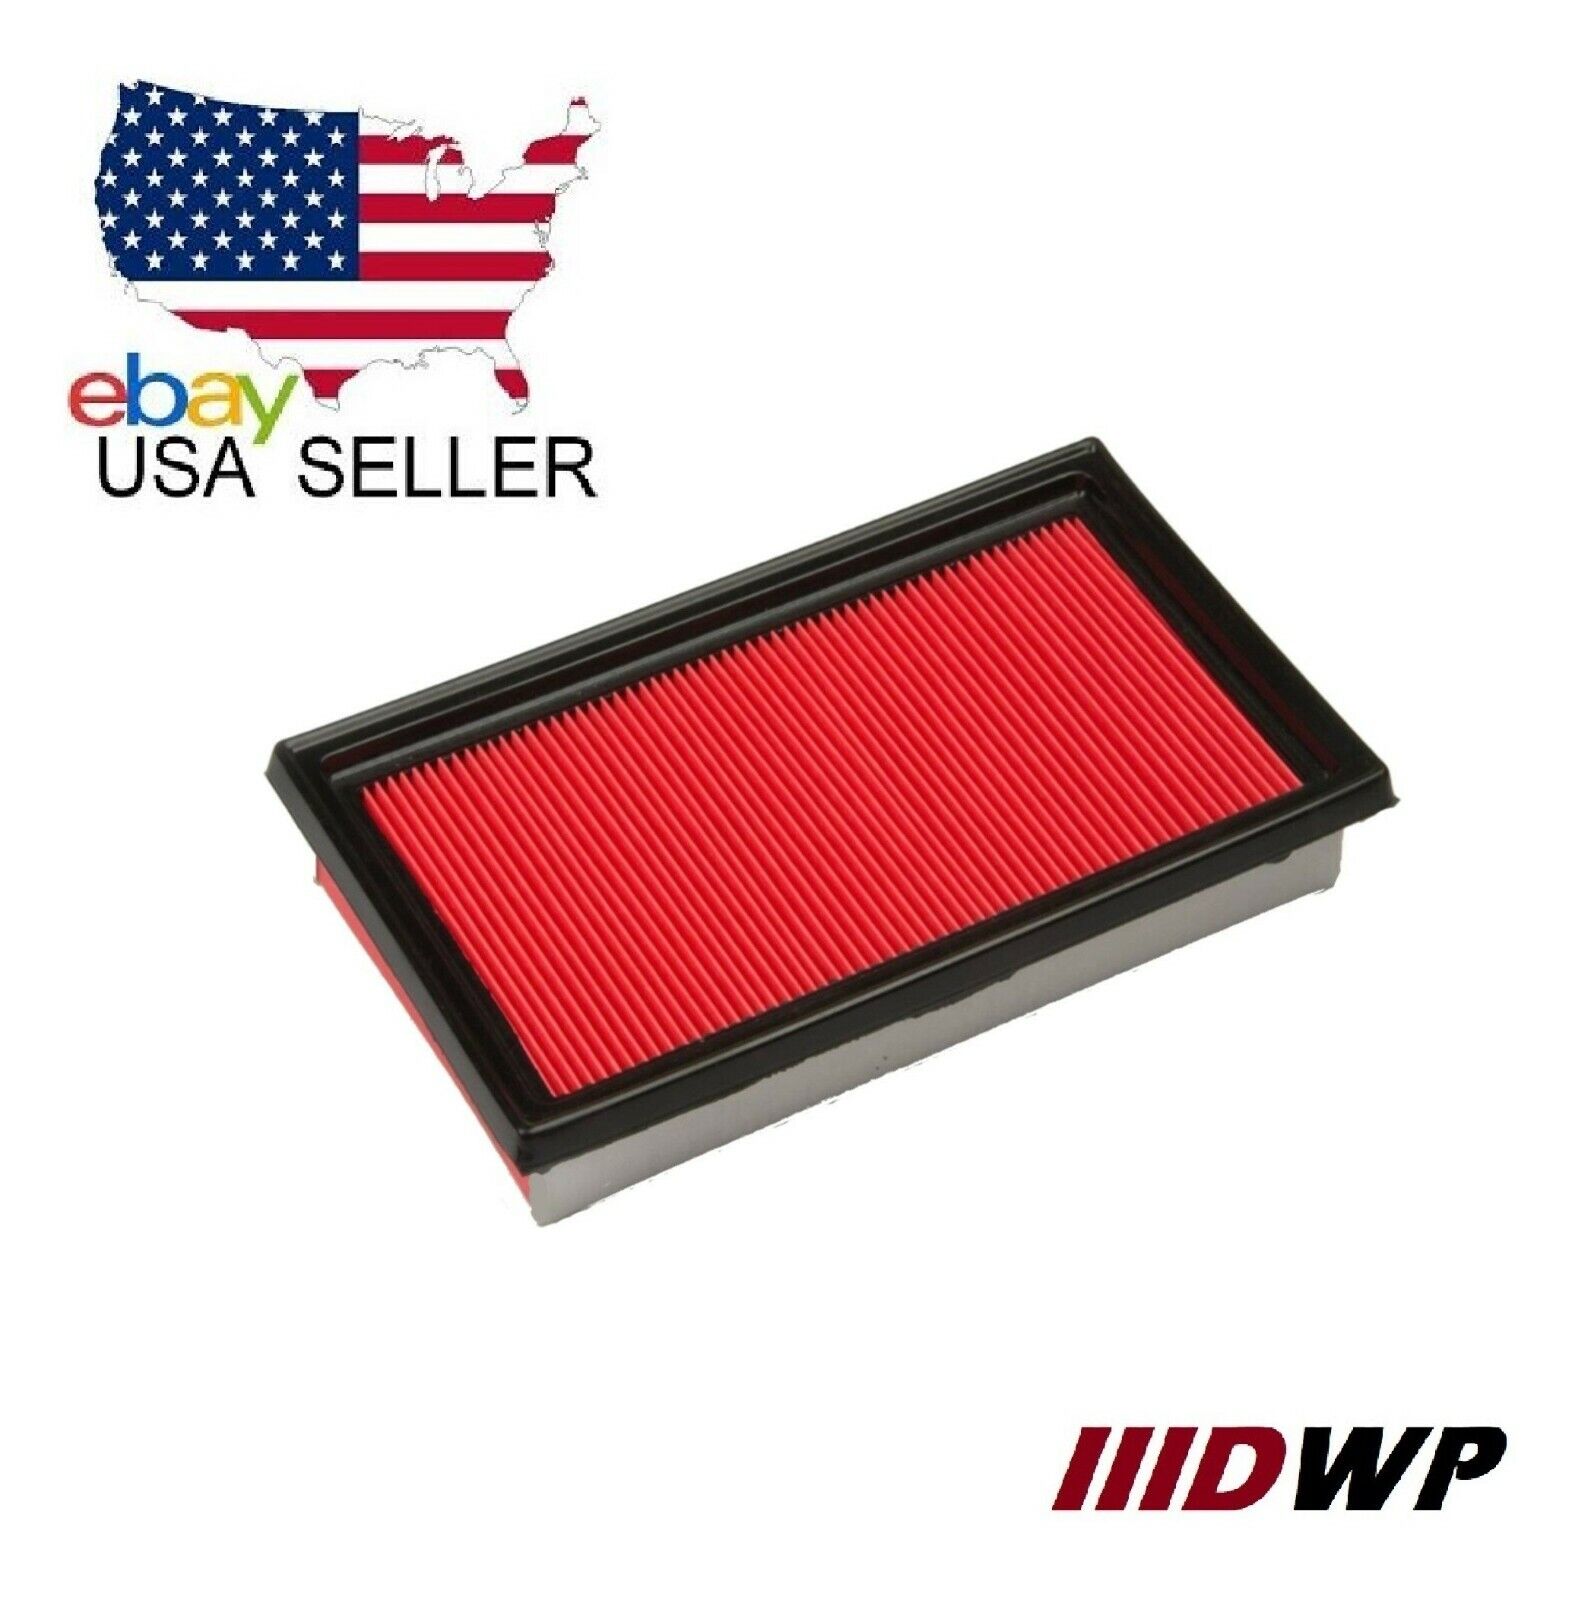 A24278 ENGINE AIR FILTER FOR ALTIMA MURANO XTERRA SENTRA QUEST PATHFINDER MAXIMA